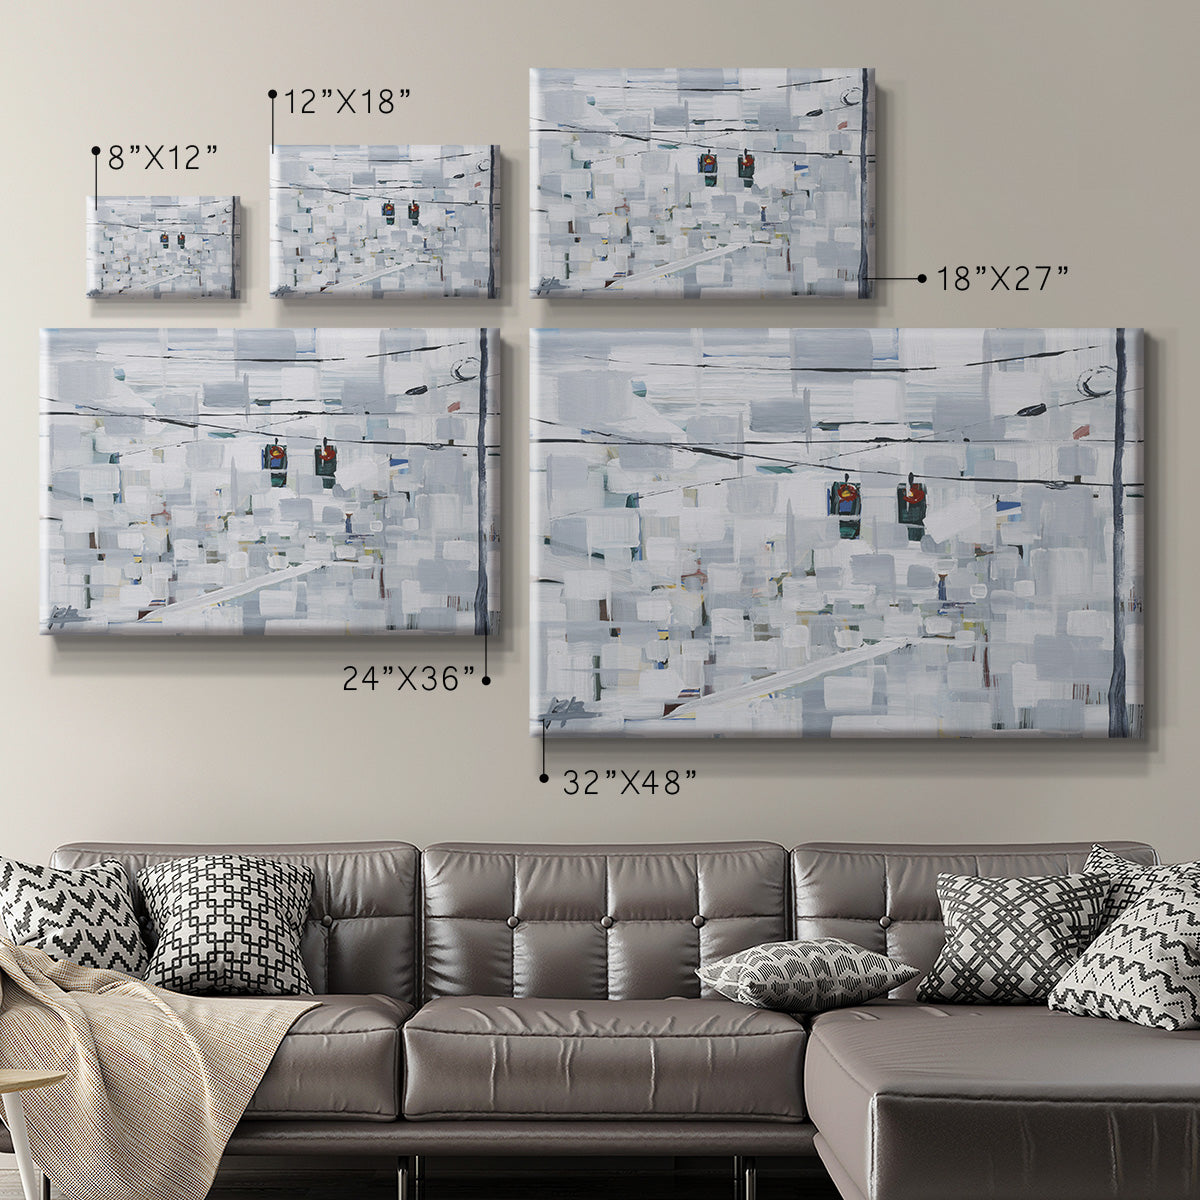 Stop on White Premium Gallery Wrapped Canvas - Ready to Hang